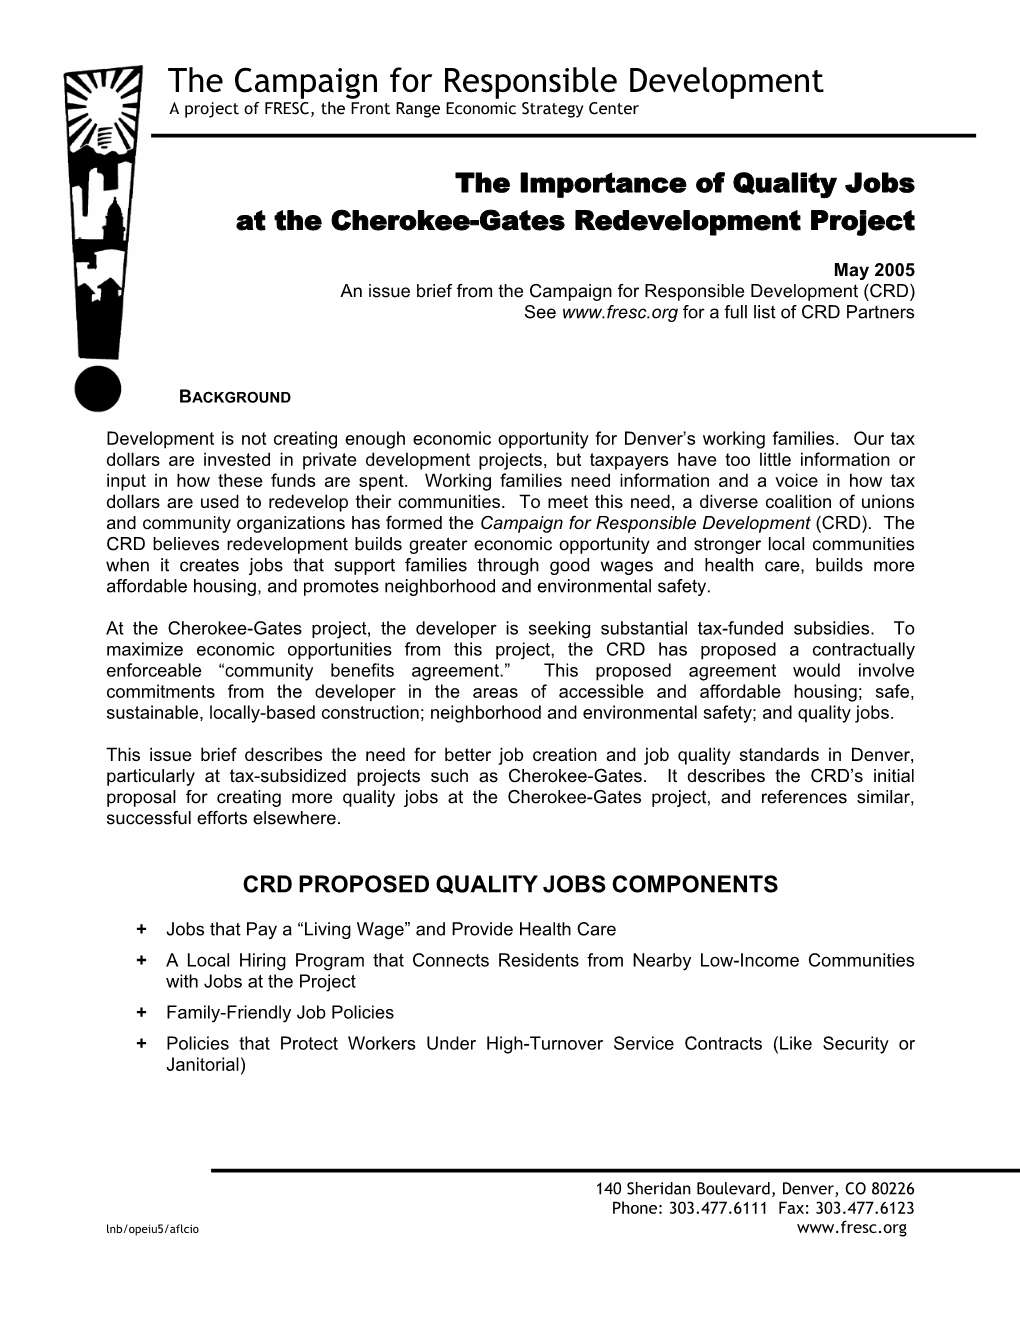 The Importance of Quality Jobs at the Cherokee-Gates Redevelopment Project